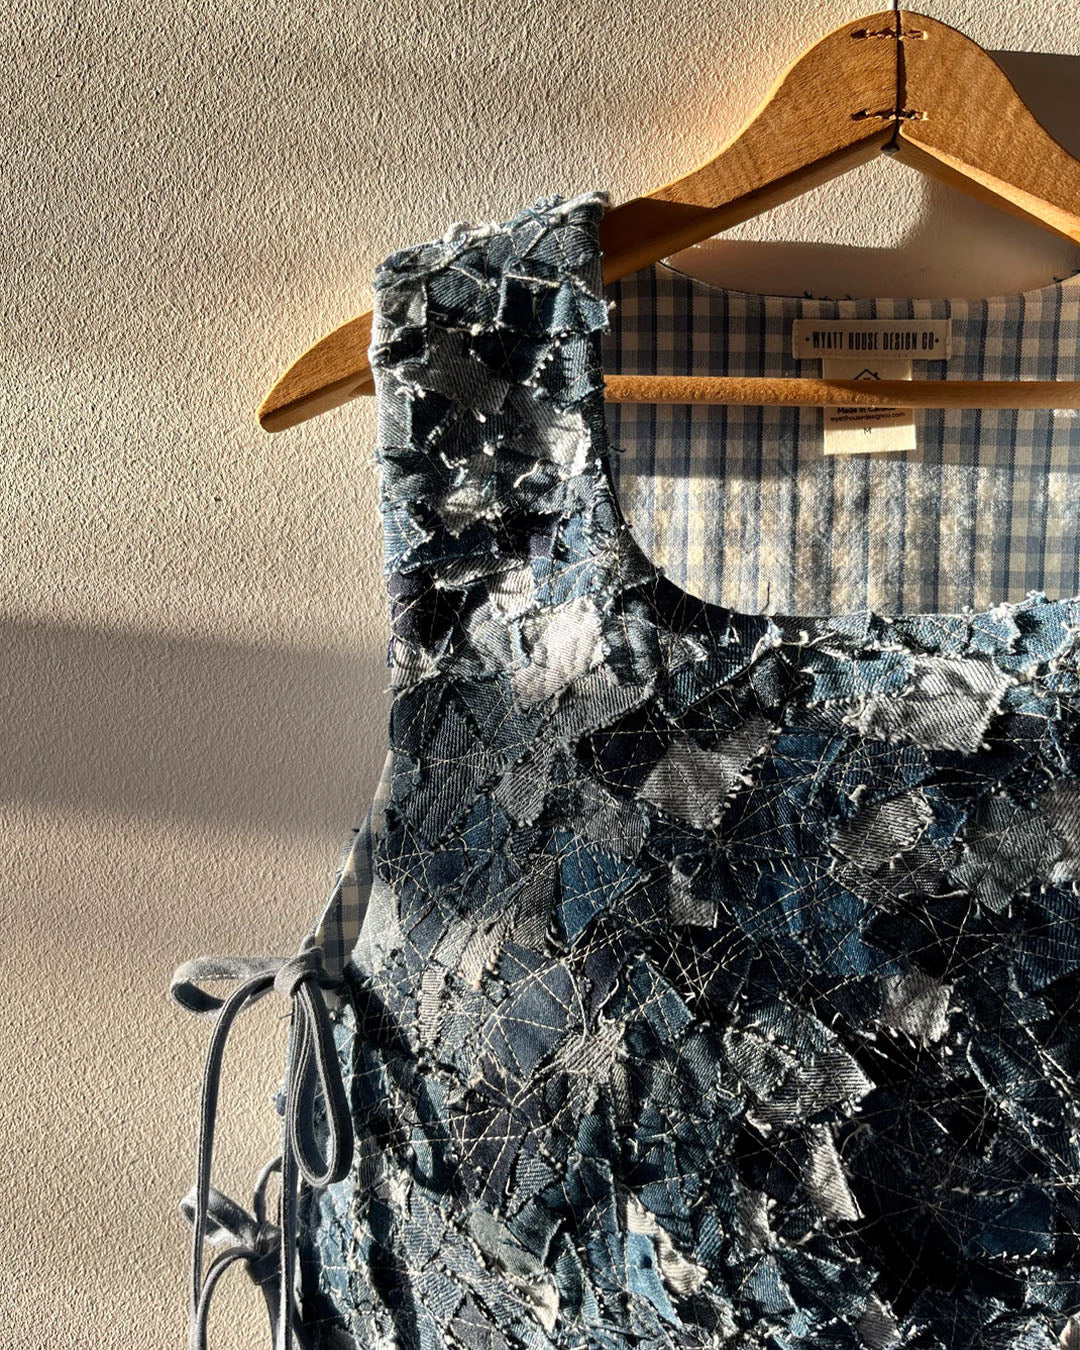 Hailey's handcrafted denim garment hangs on a wooden hanger, illuminated by natural light that highlights the textured patchwork and detailed stitches, reflecting the creativity in women's fashion design.